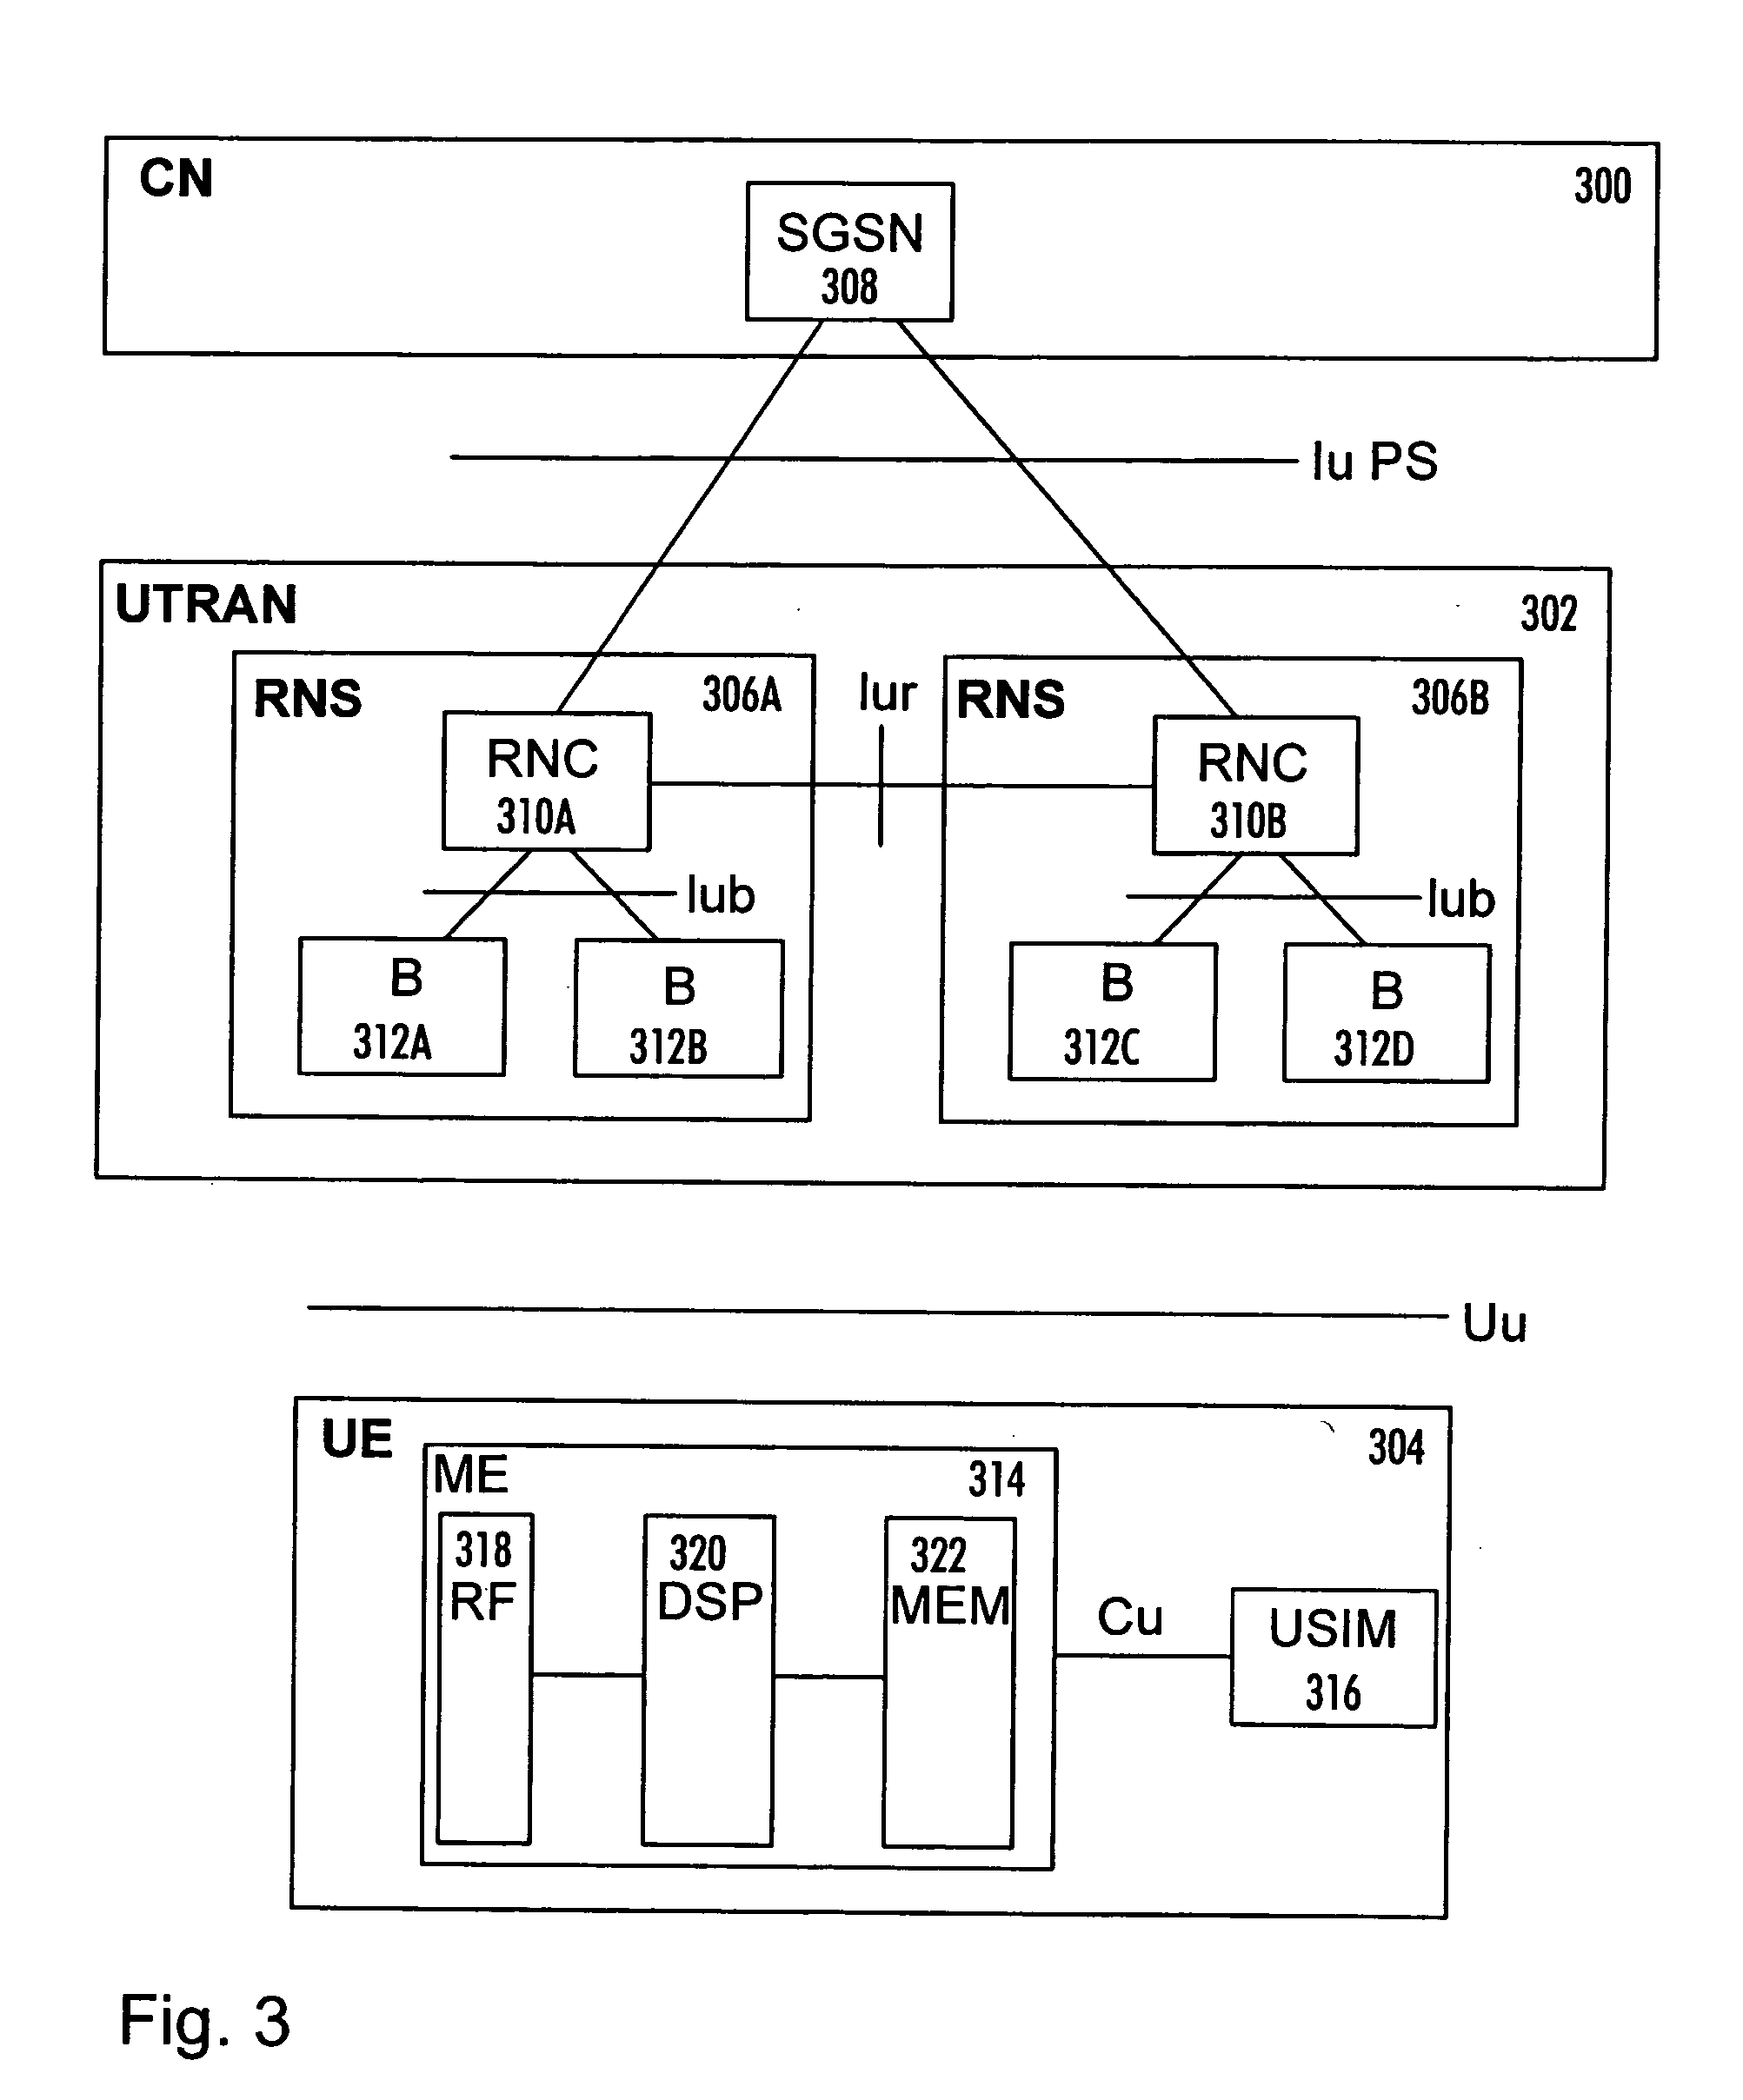 Radio resource allocation in telecommunication system